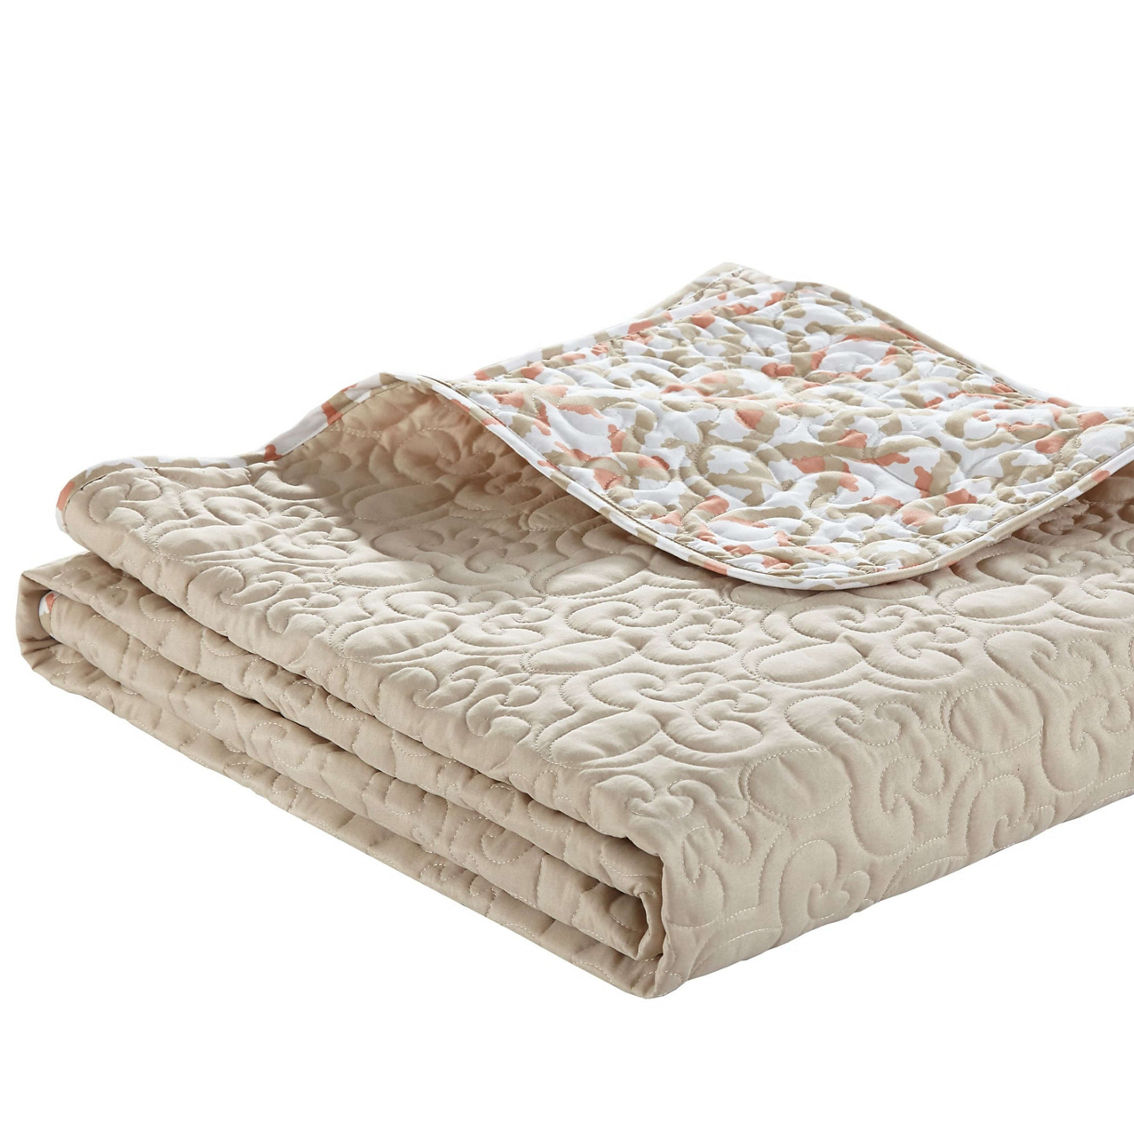 Chic Home Anat 5pc Quilt Set - Image 3 of 5